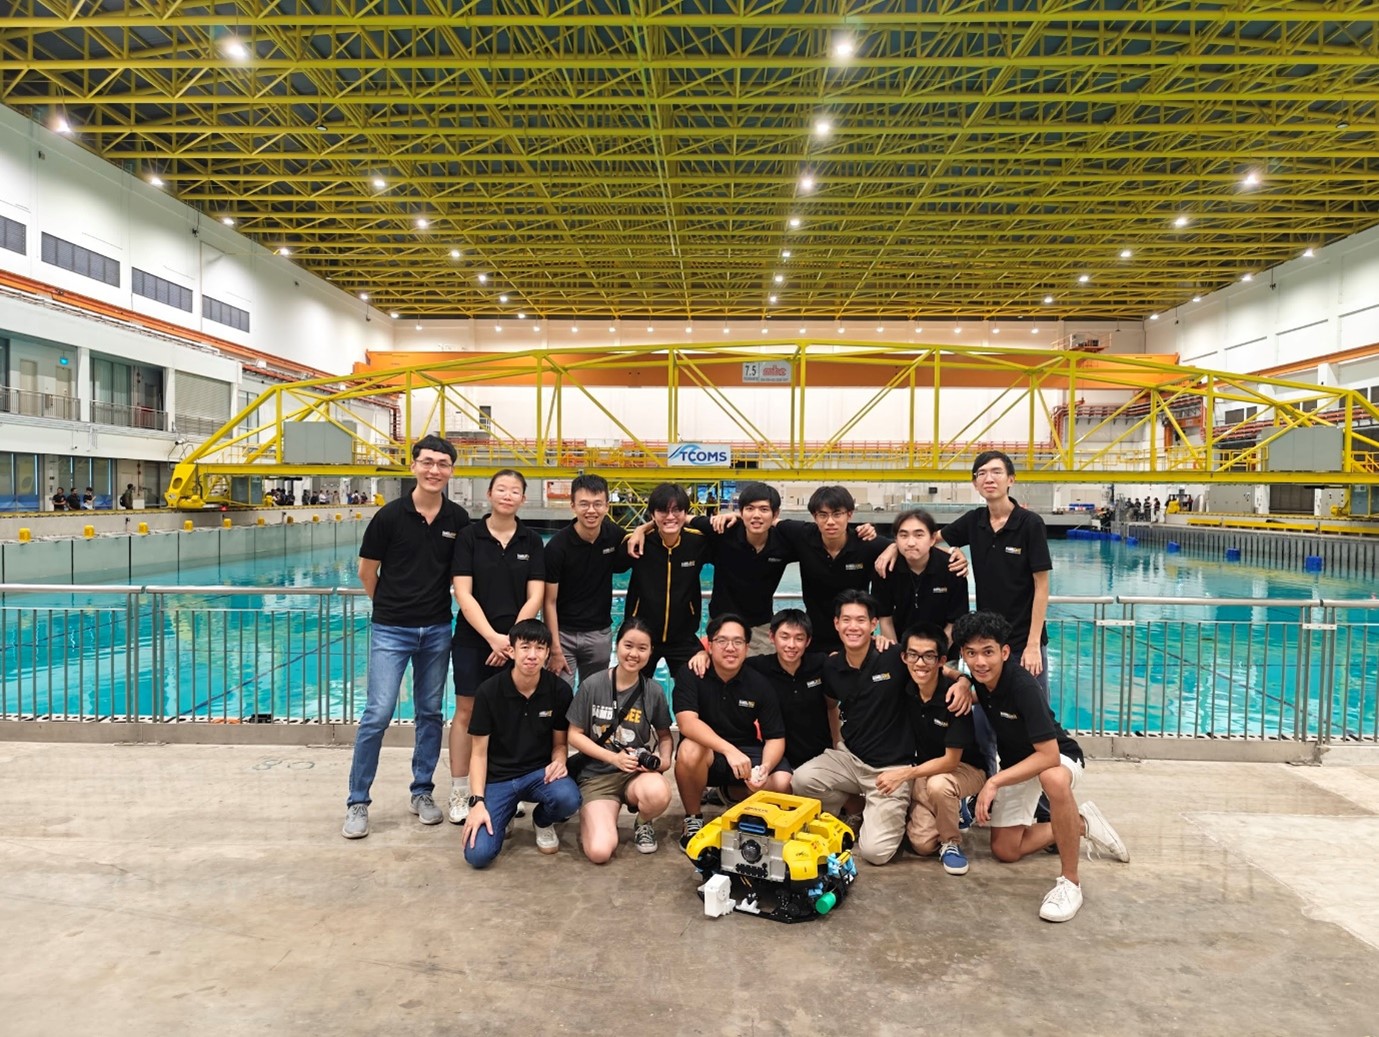 The bonus round was held at NUS TCOMS, in which Team Bumblebee clinched first place. 